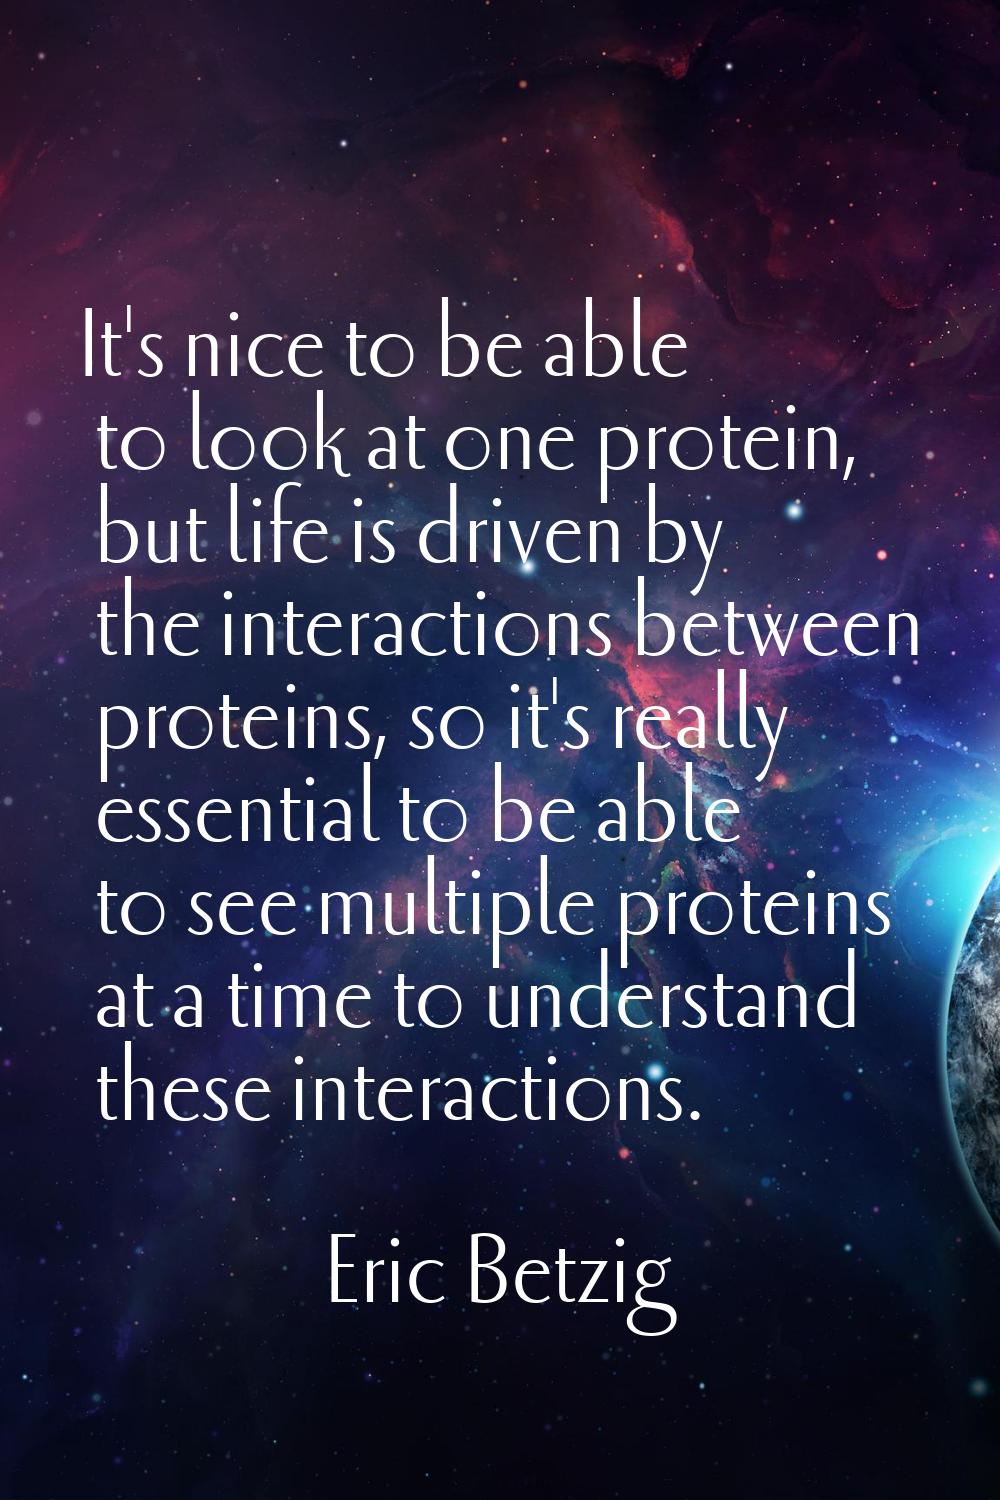 It's nice to be able to look at one protein, but life is driven by the interactions between protein